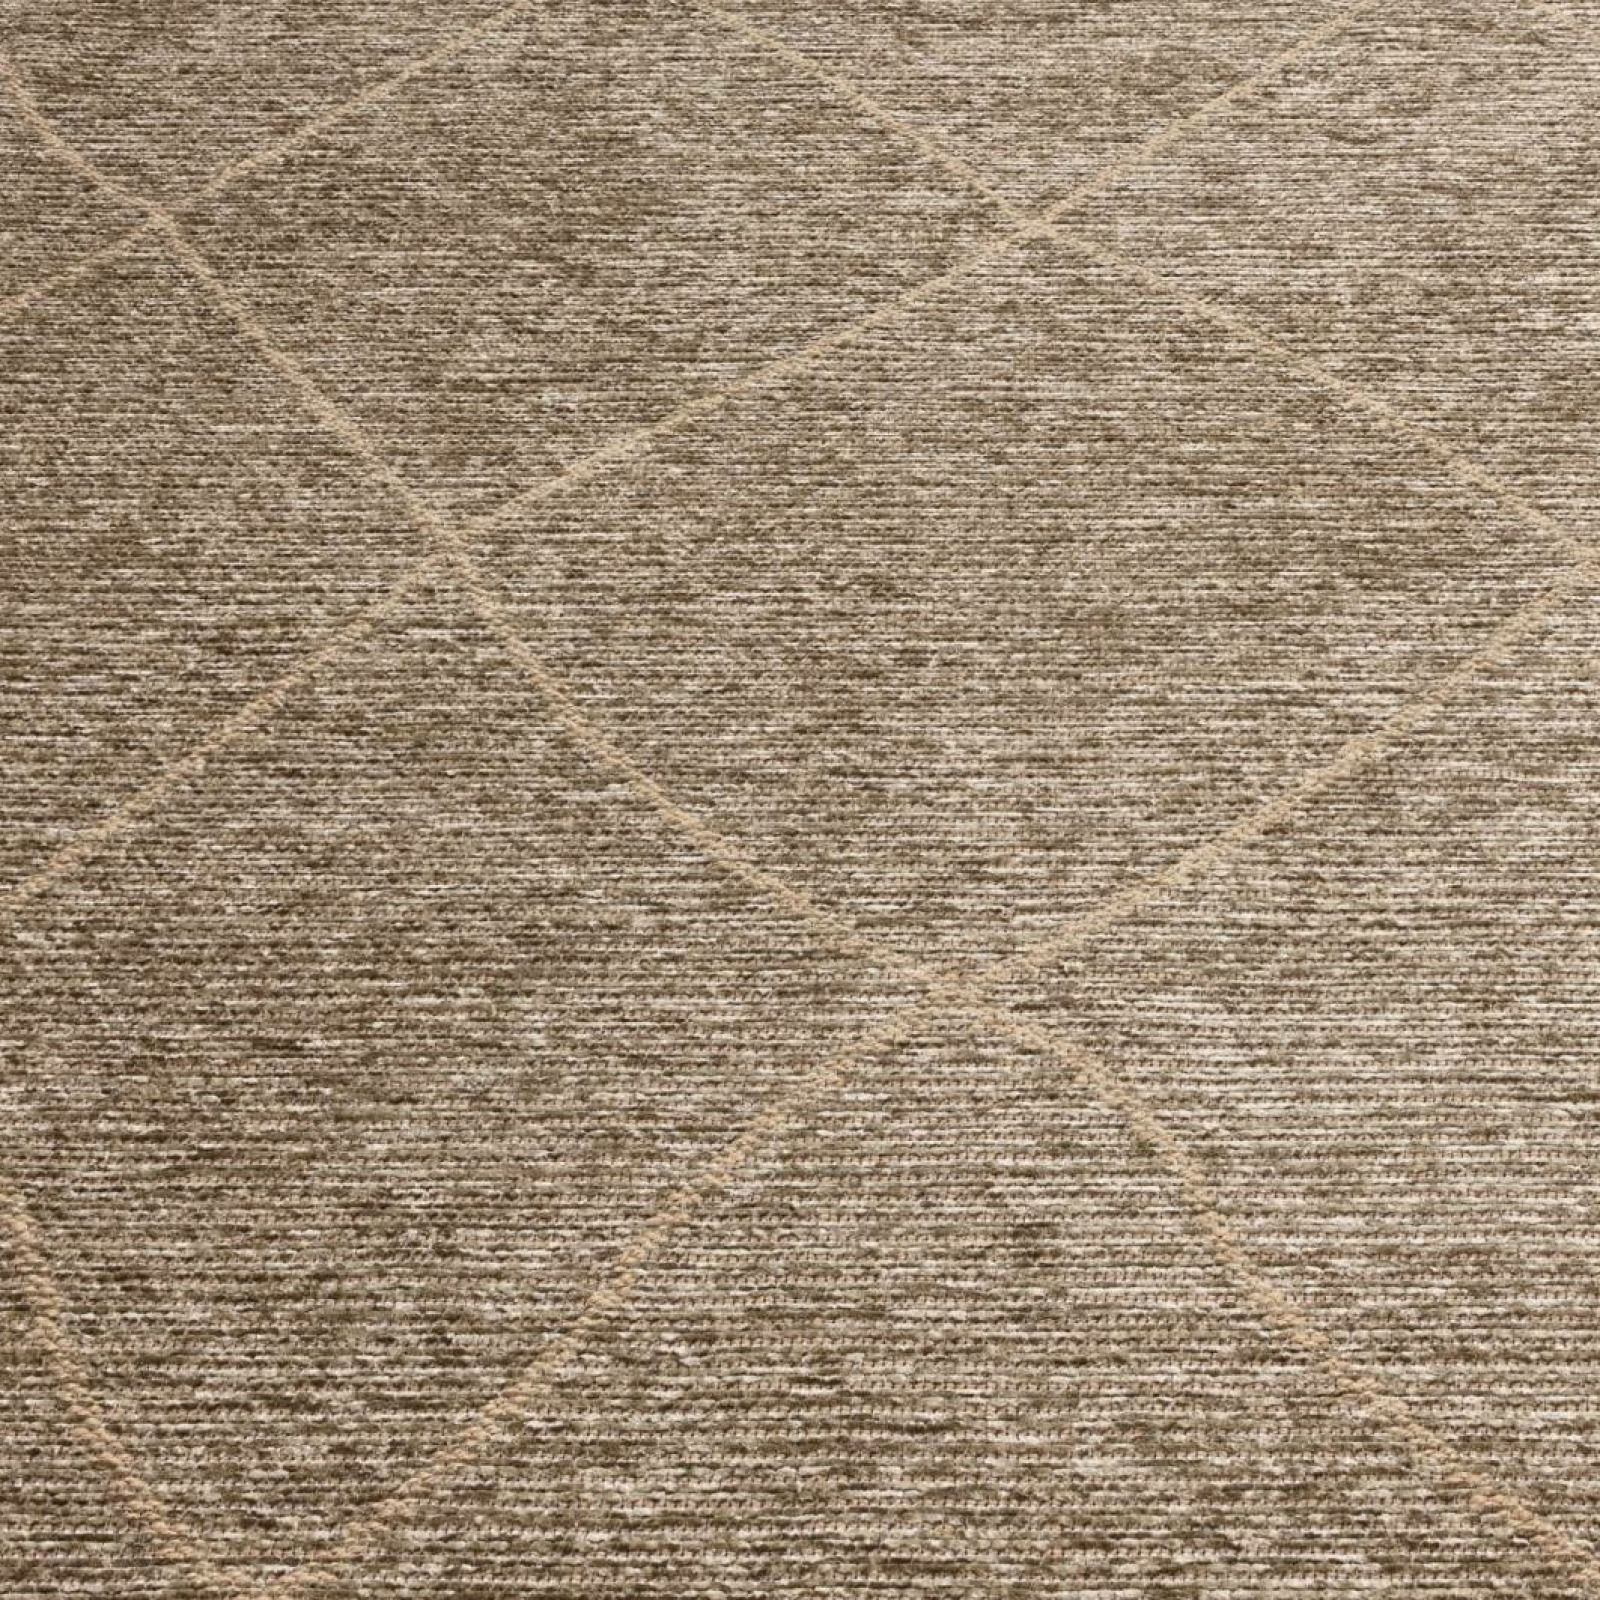 Mulberry Taupe rug